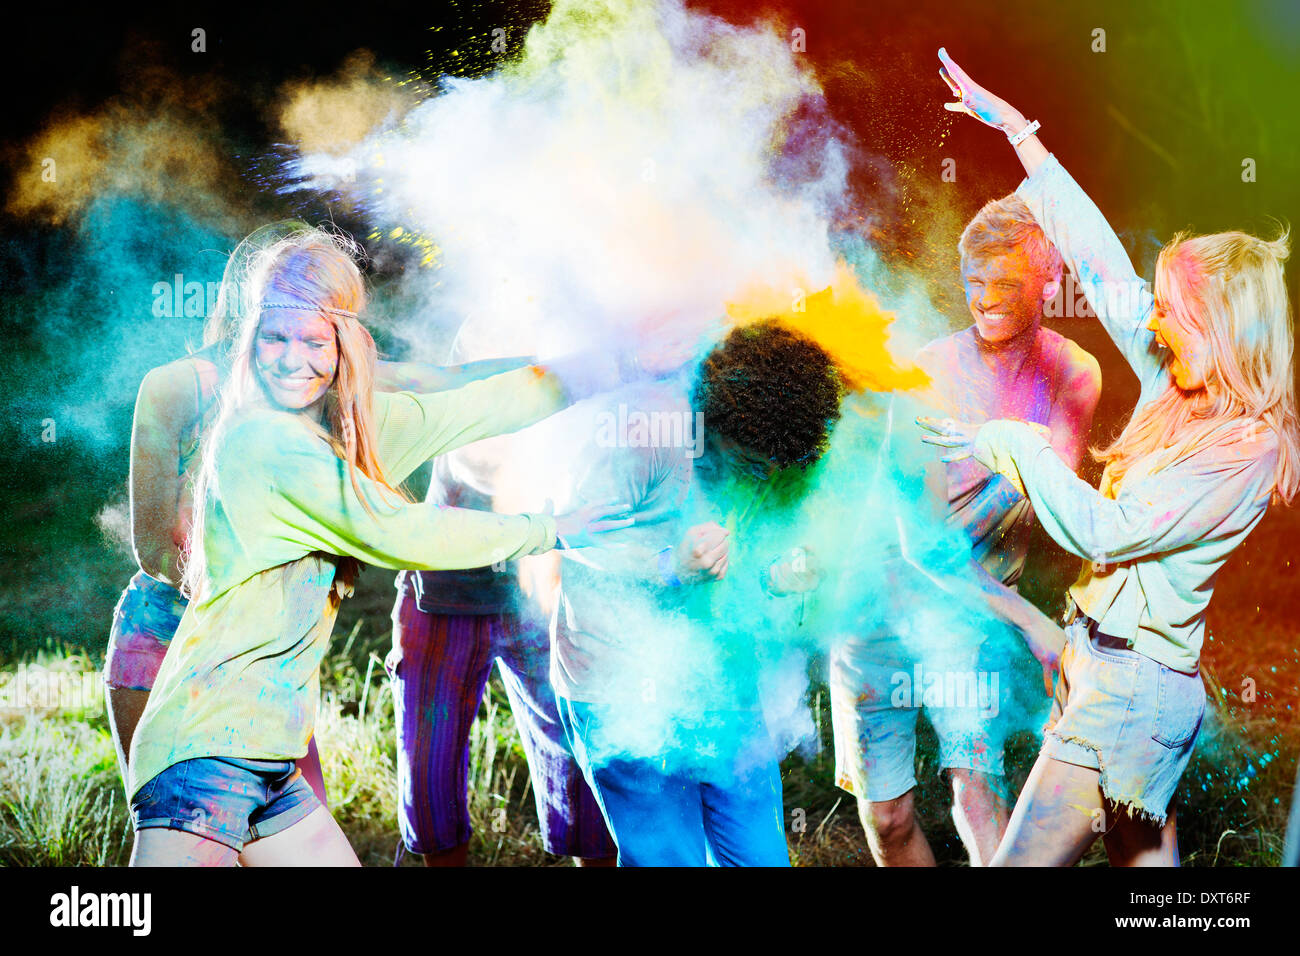 Friends throwing chalk dye on man at music festival Stock Photo